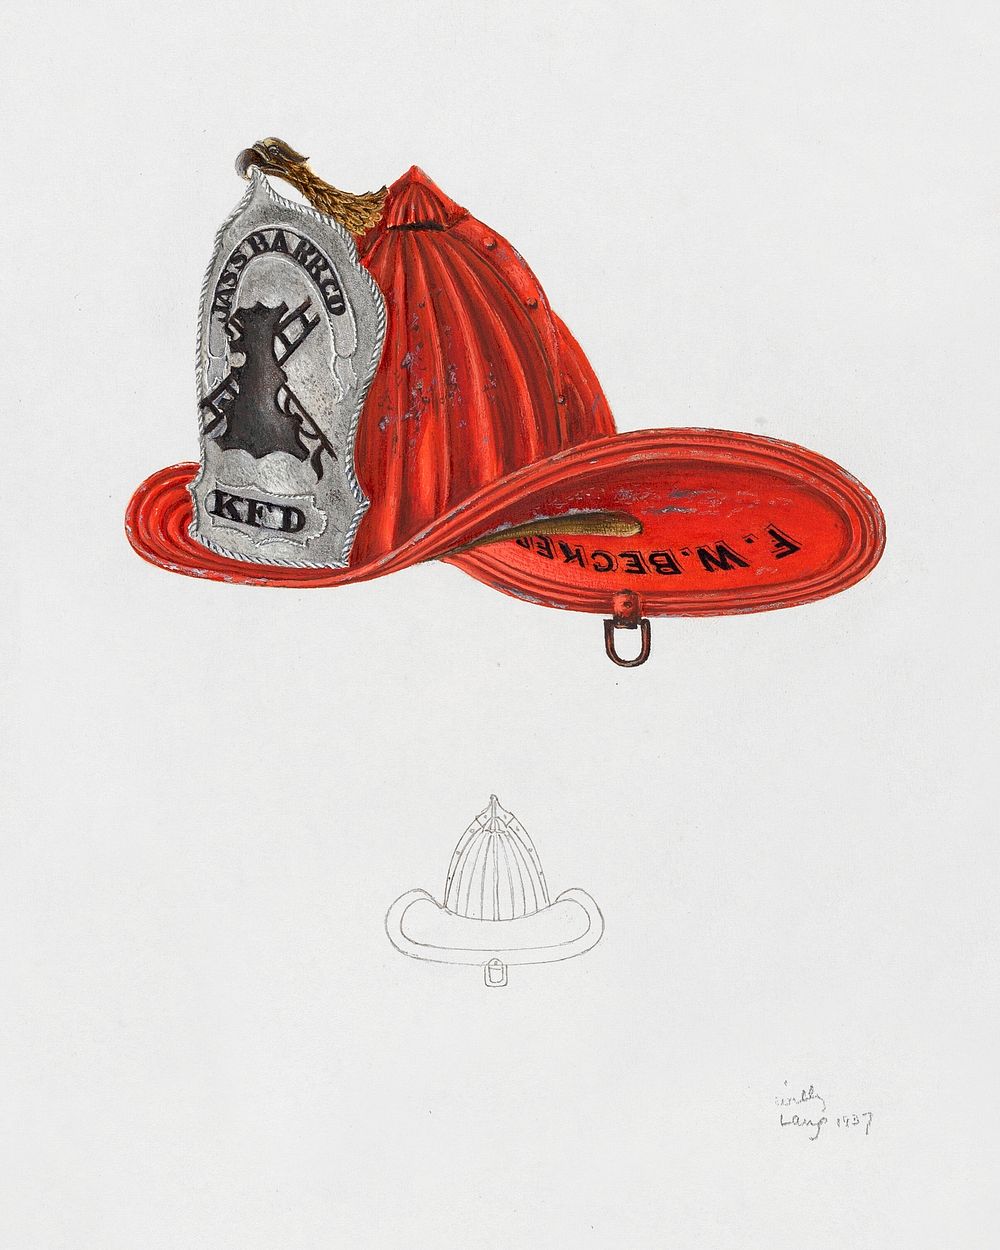 Fireman's Hat (1937) by William Lang. Original from The National Gallery of Art. Digitally enhanced by rawpixel.